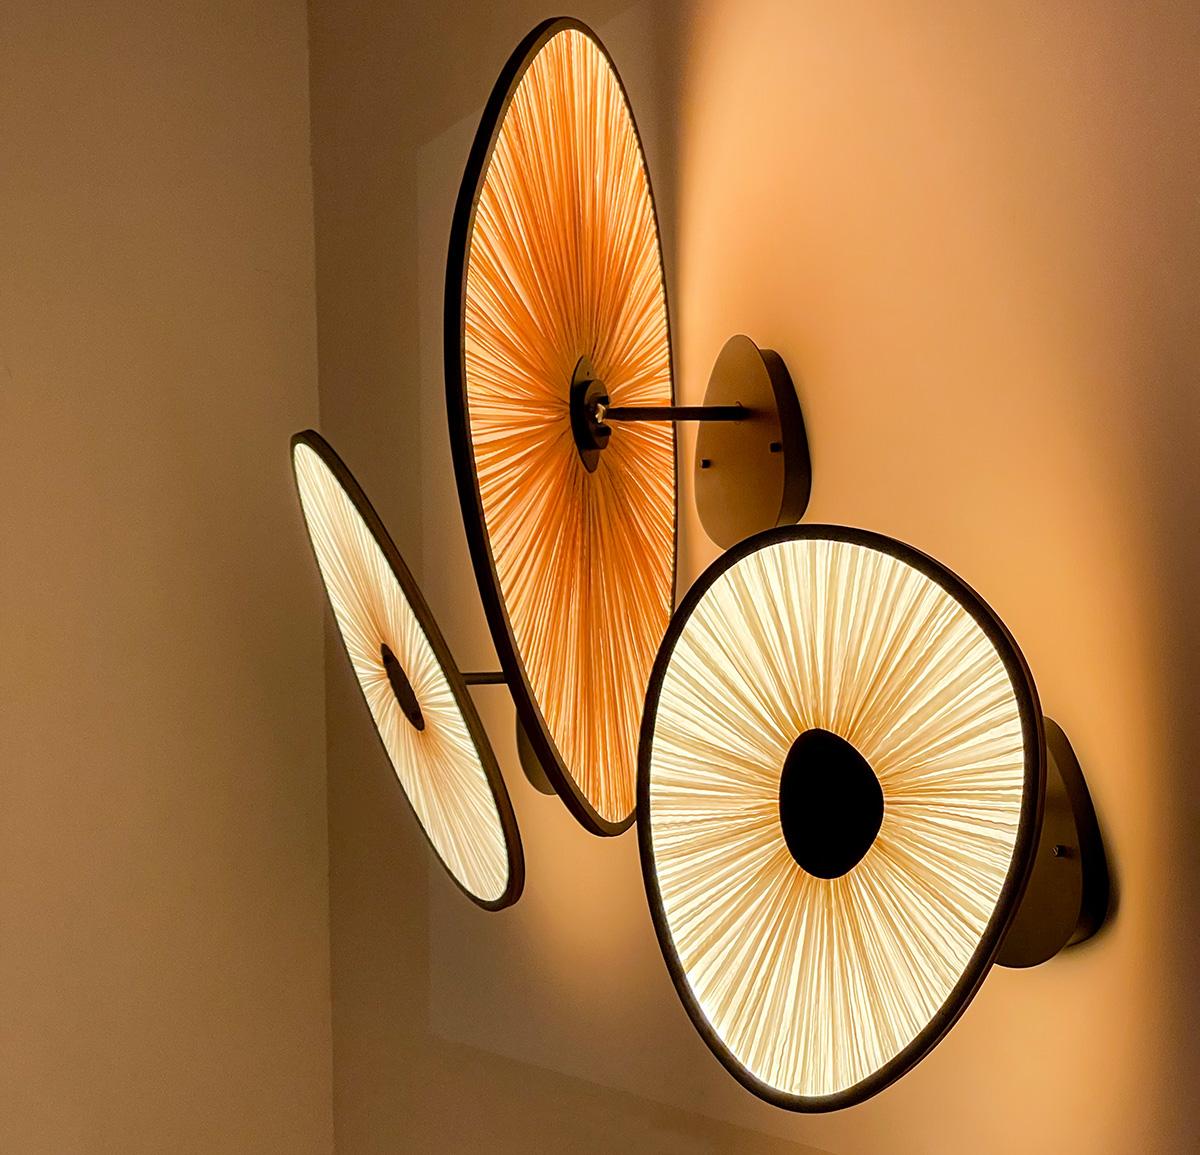 The Lake Doiran Wall & Ceiling Light is a stunning lighting fixture that elegantly showcases its luminous glow against the wall. The rotating shades create a beautiful interplay of colors, adding a touch of drama to any space. This exquisite design